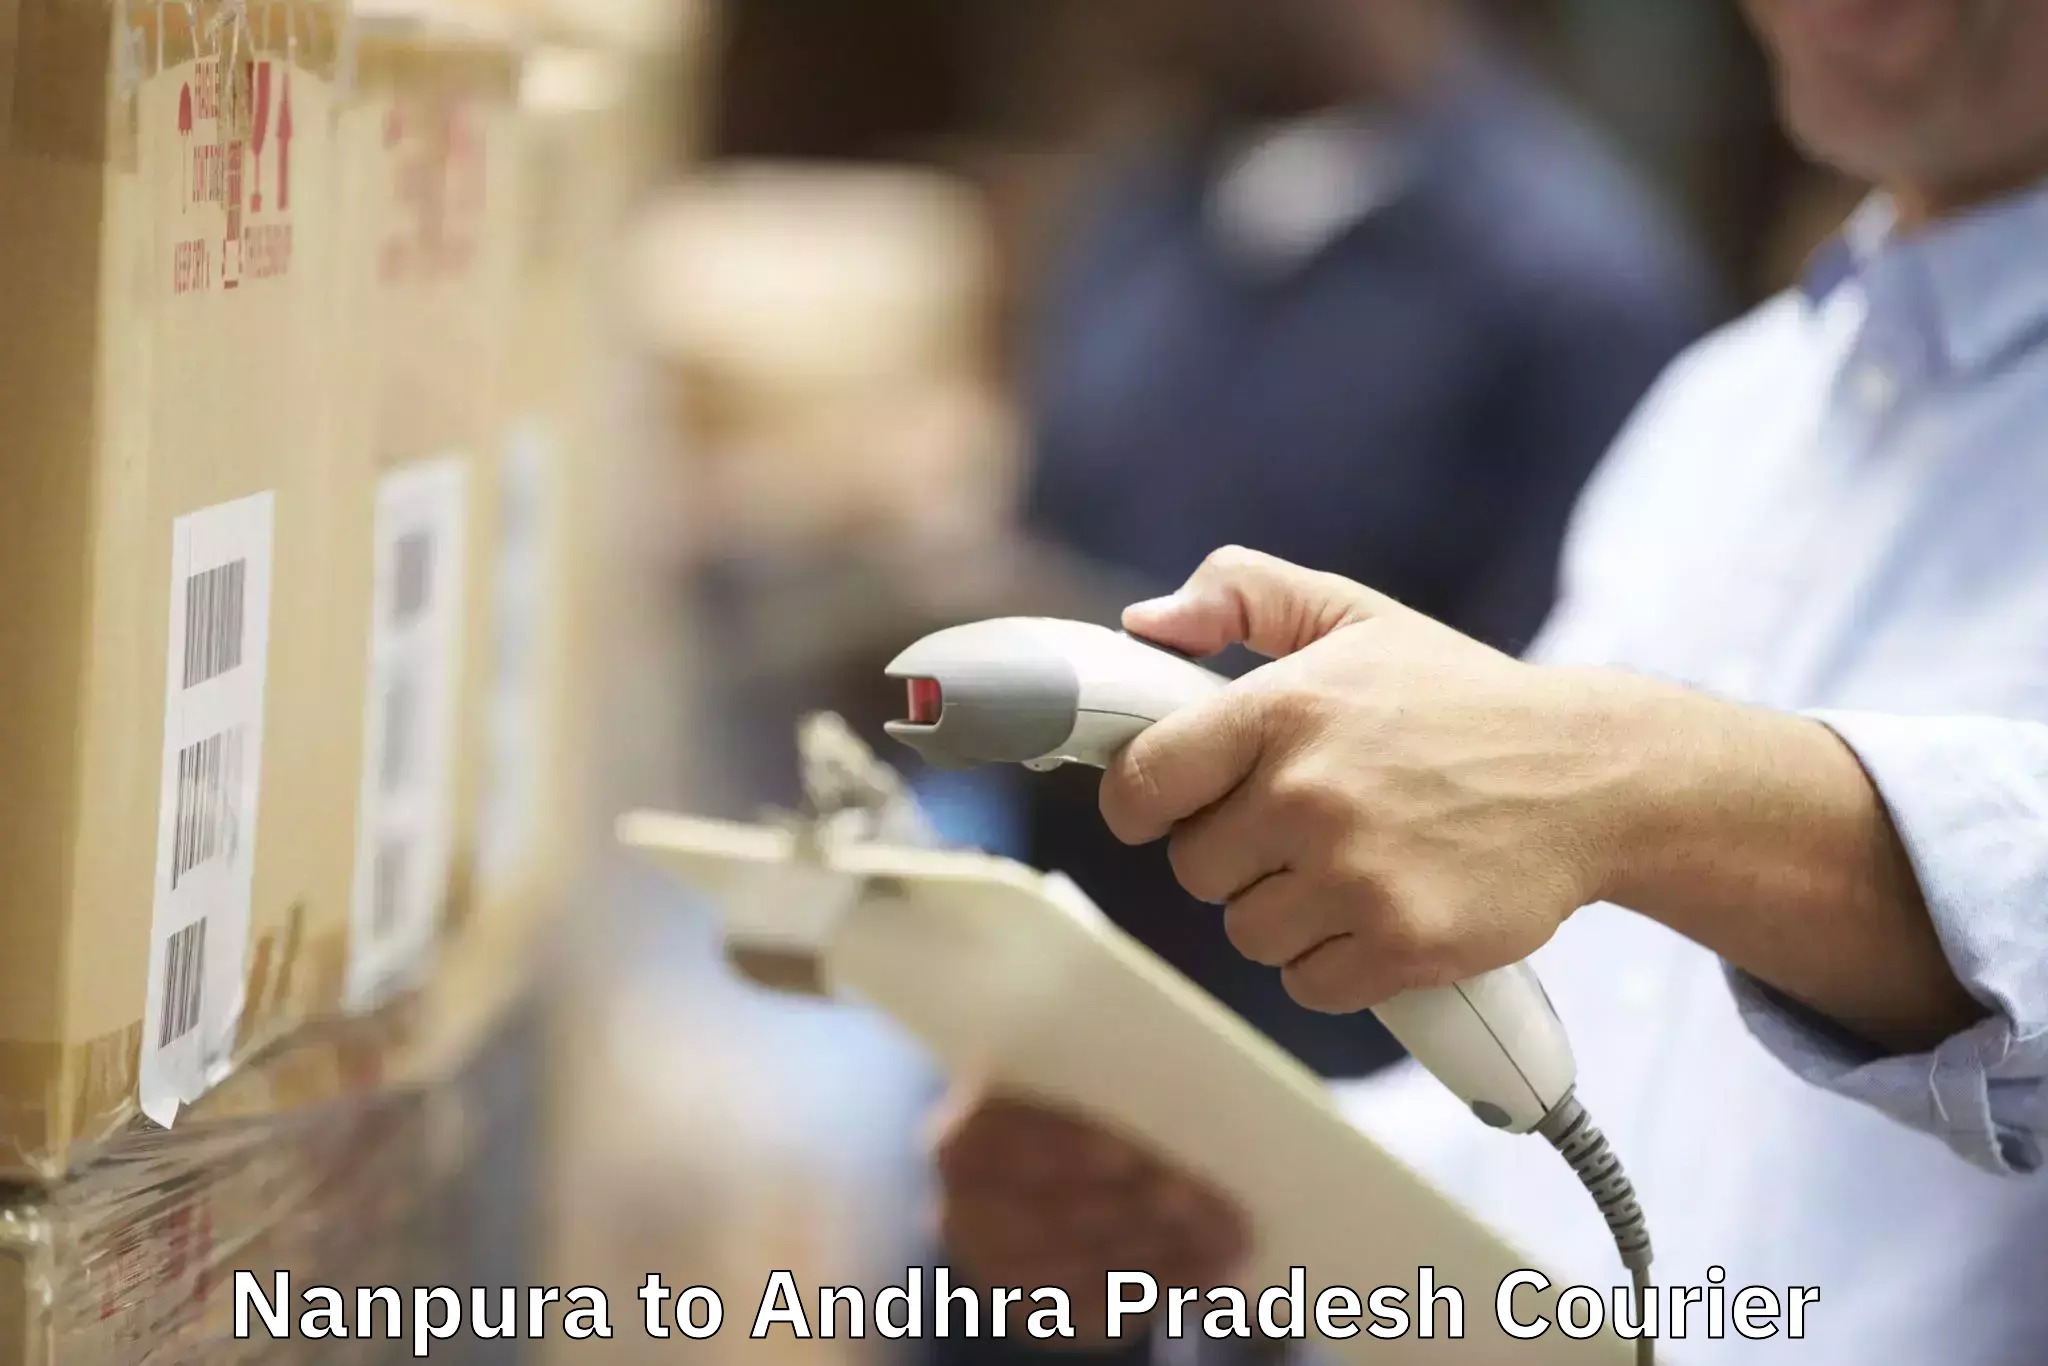 Professional packing services in Nanpura to Gudivada